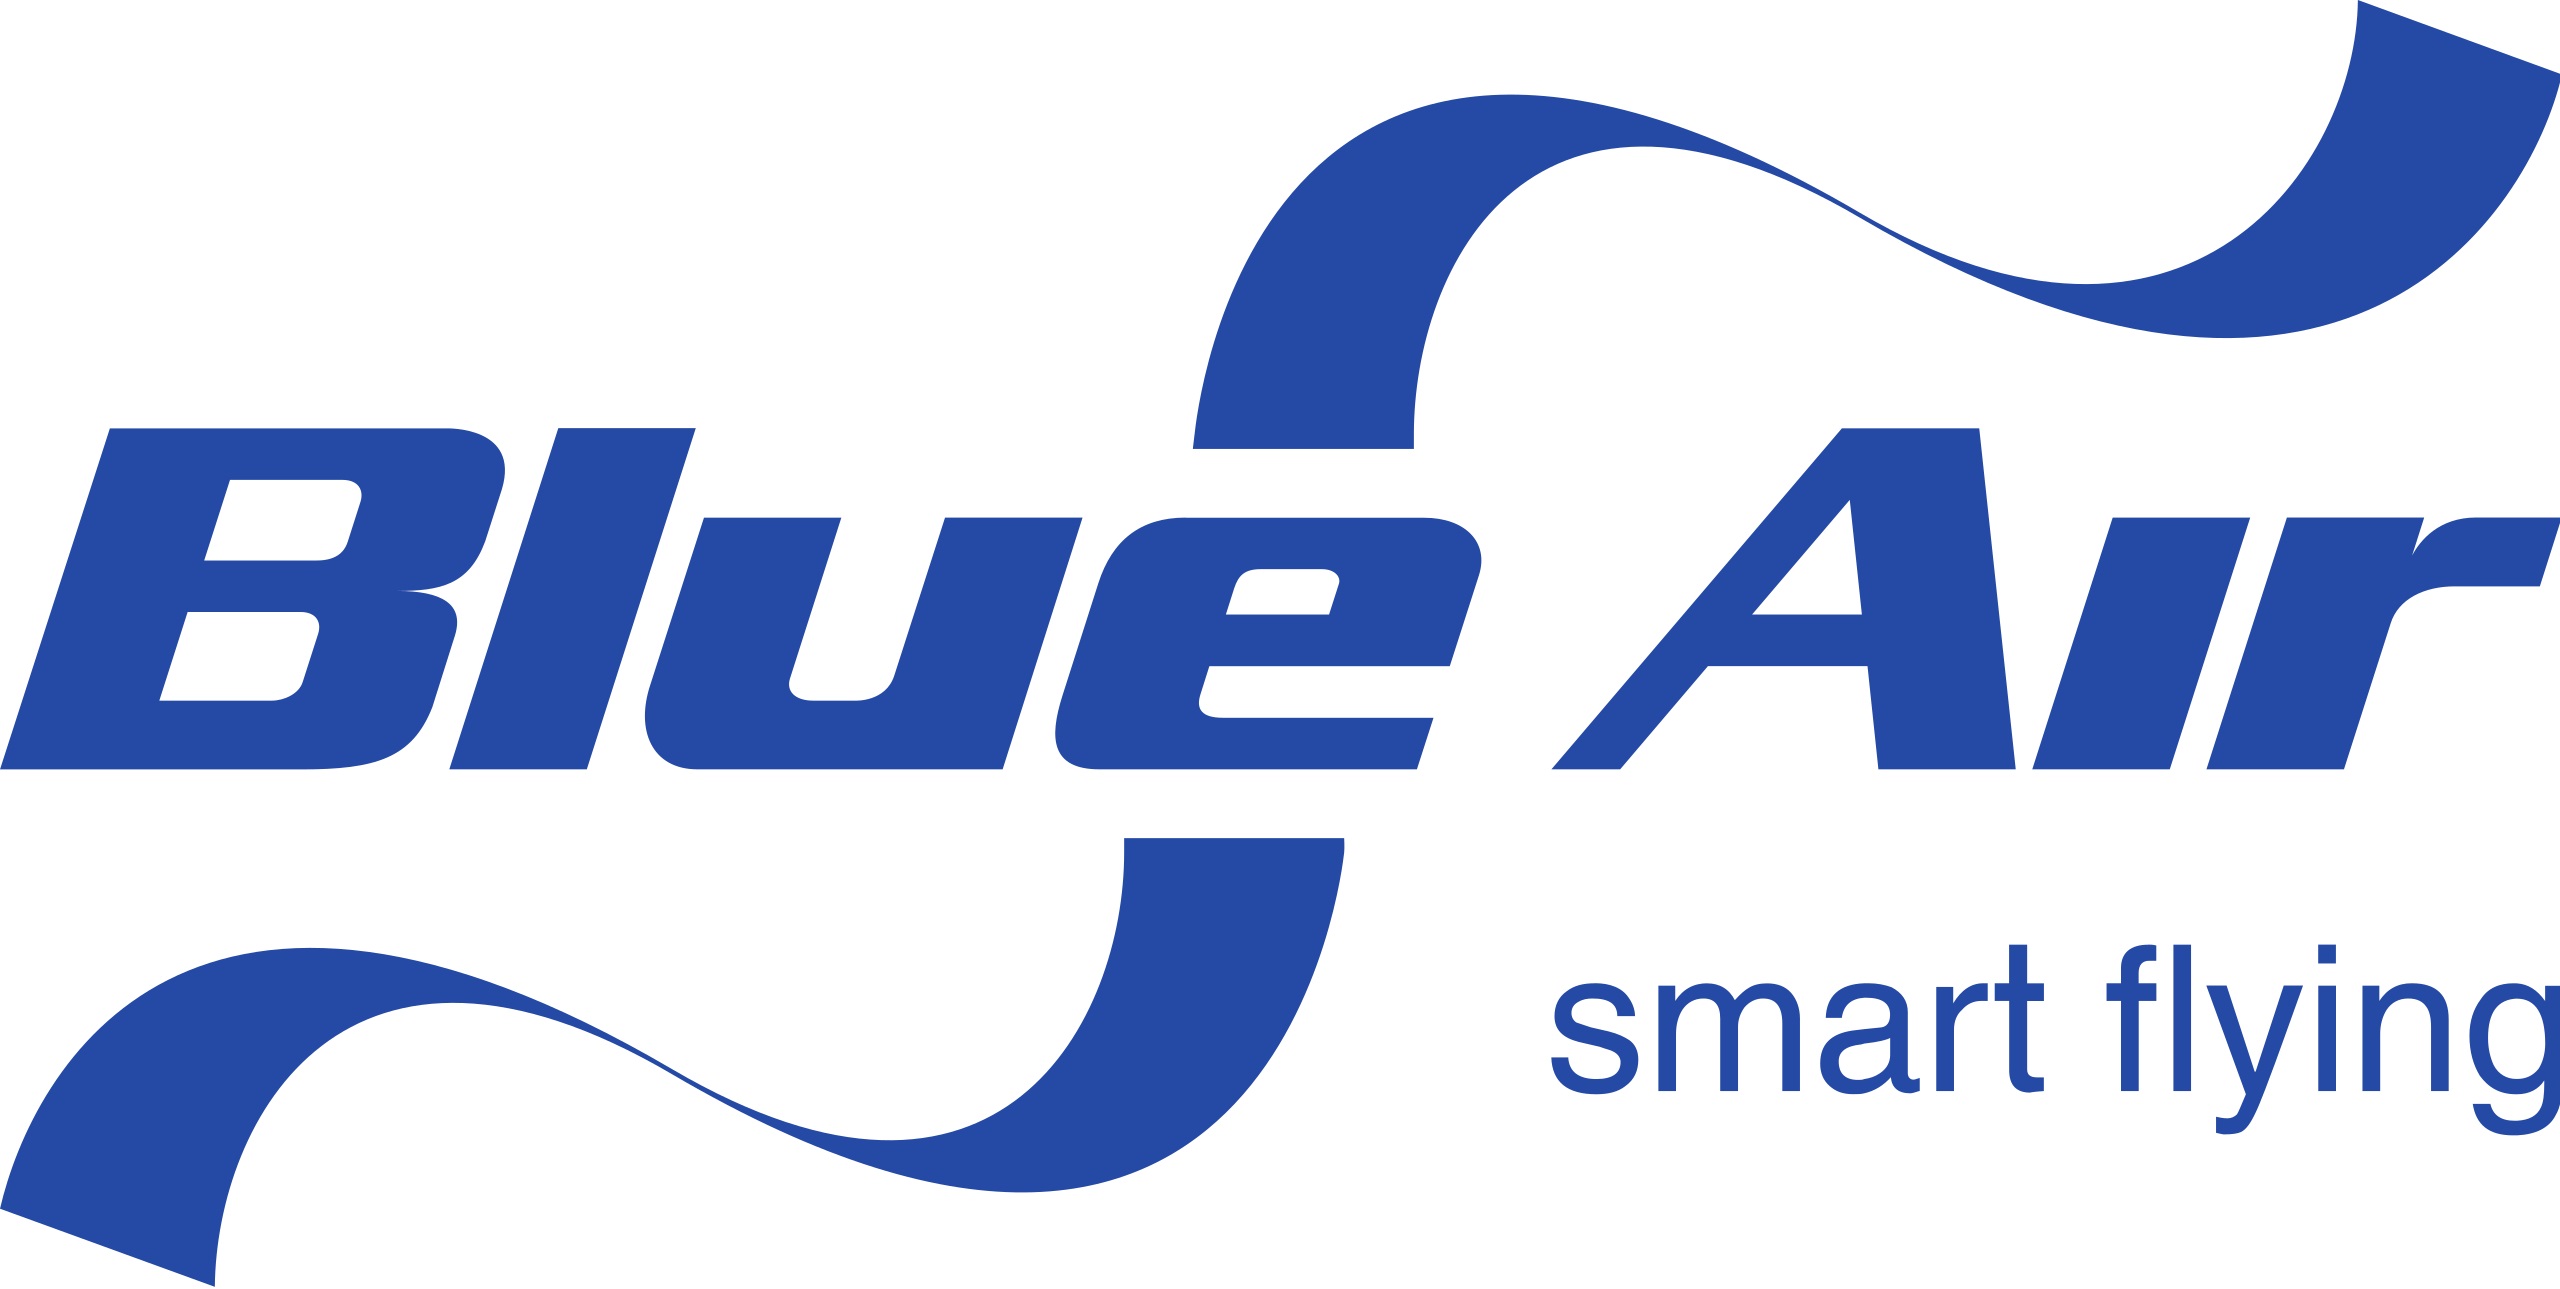 In Romania became bankrupt airline company Blue Air